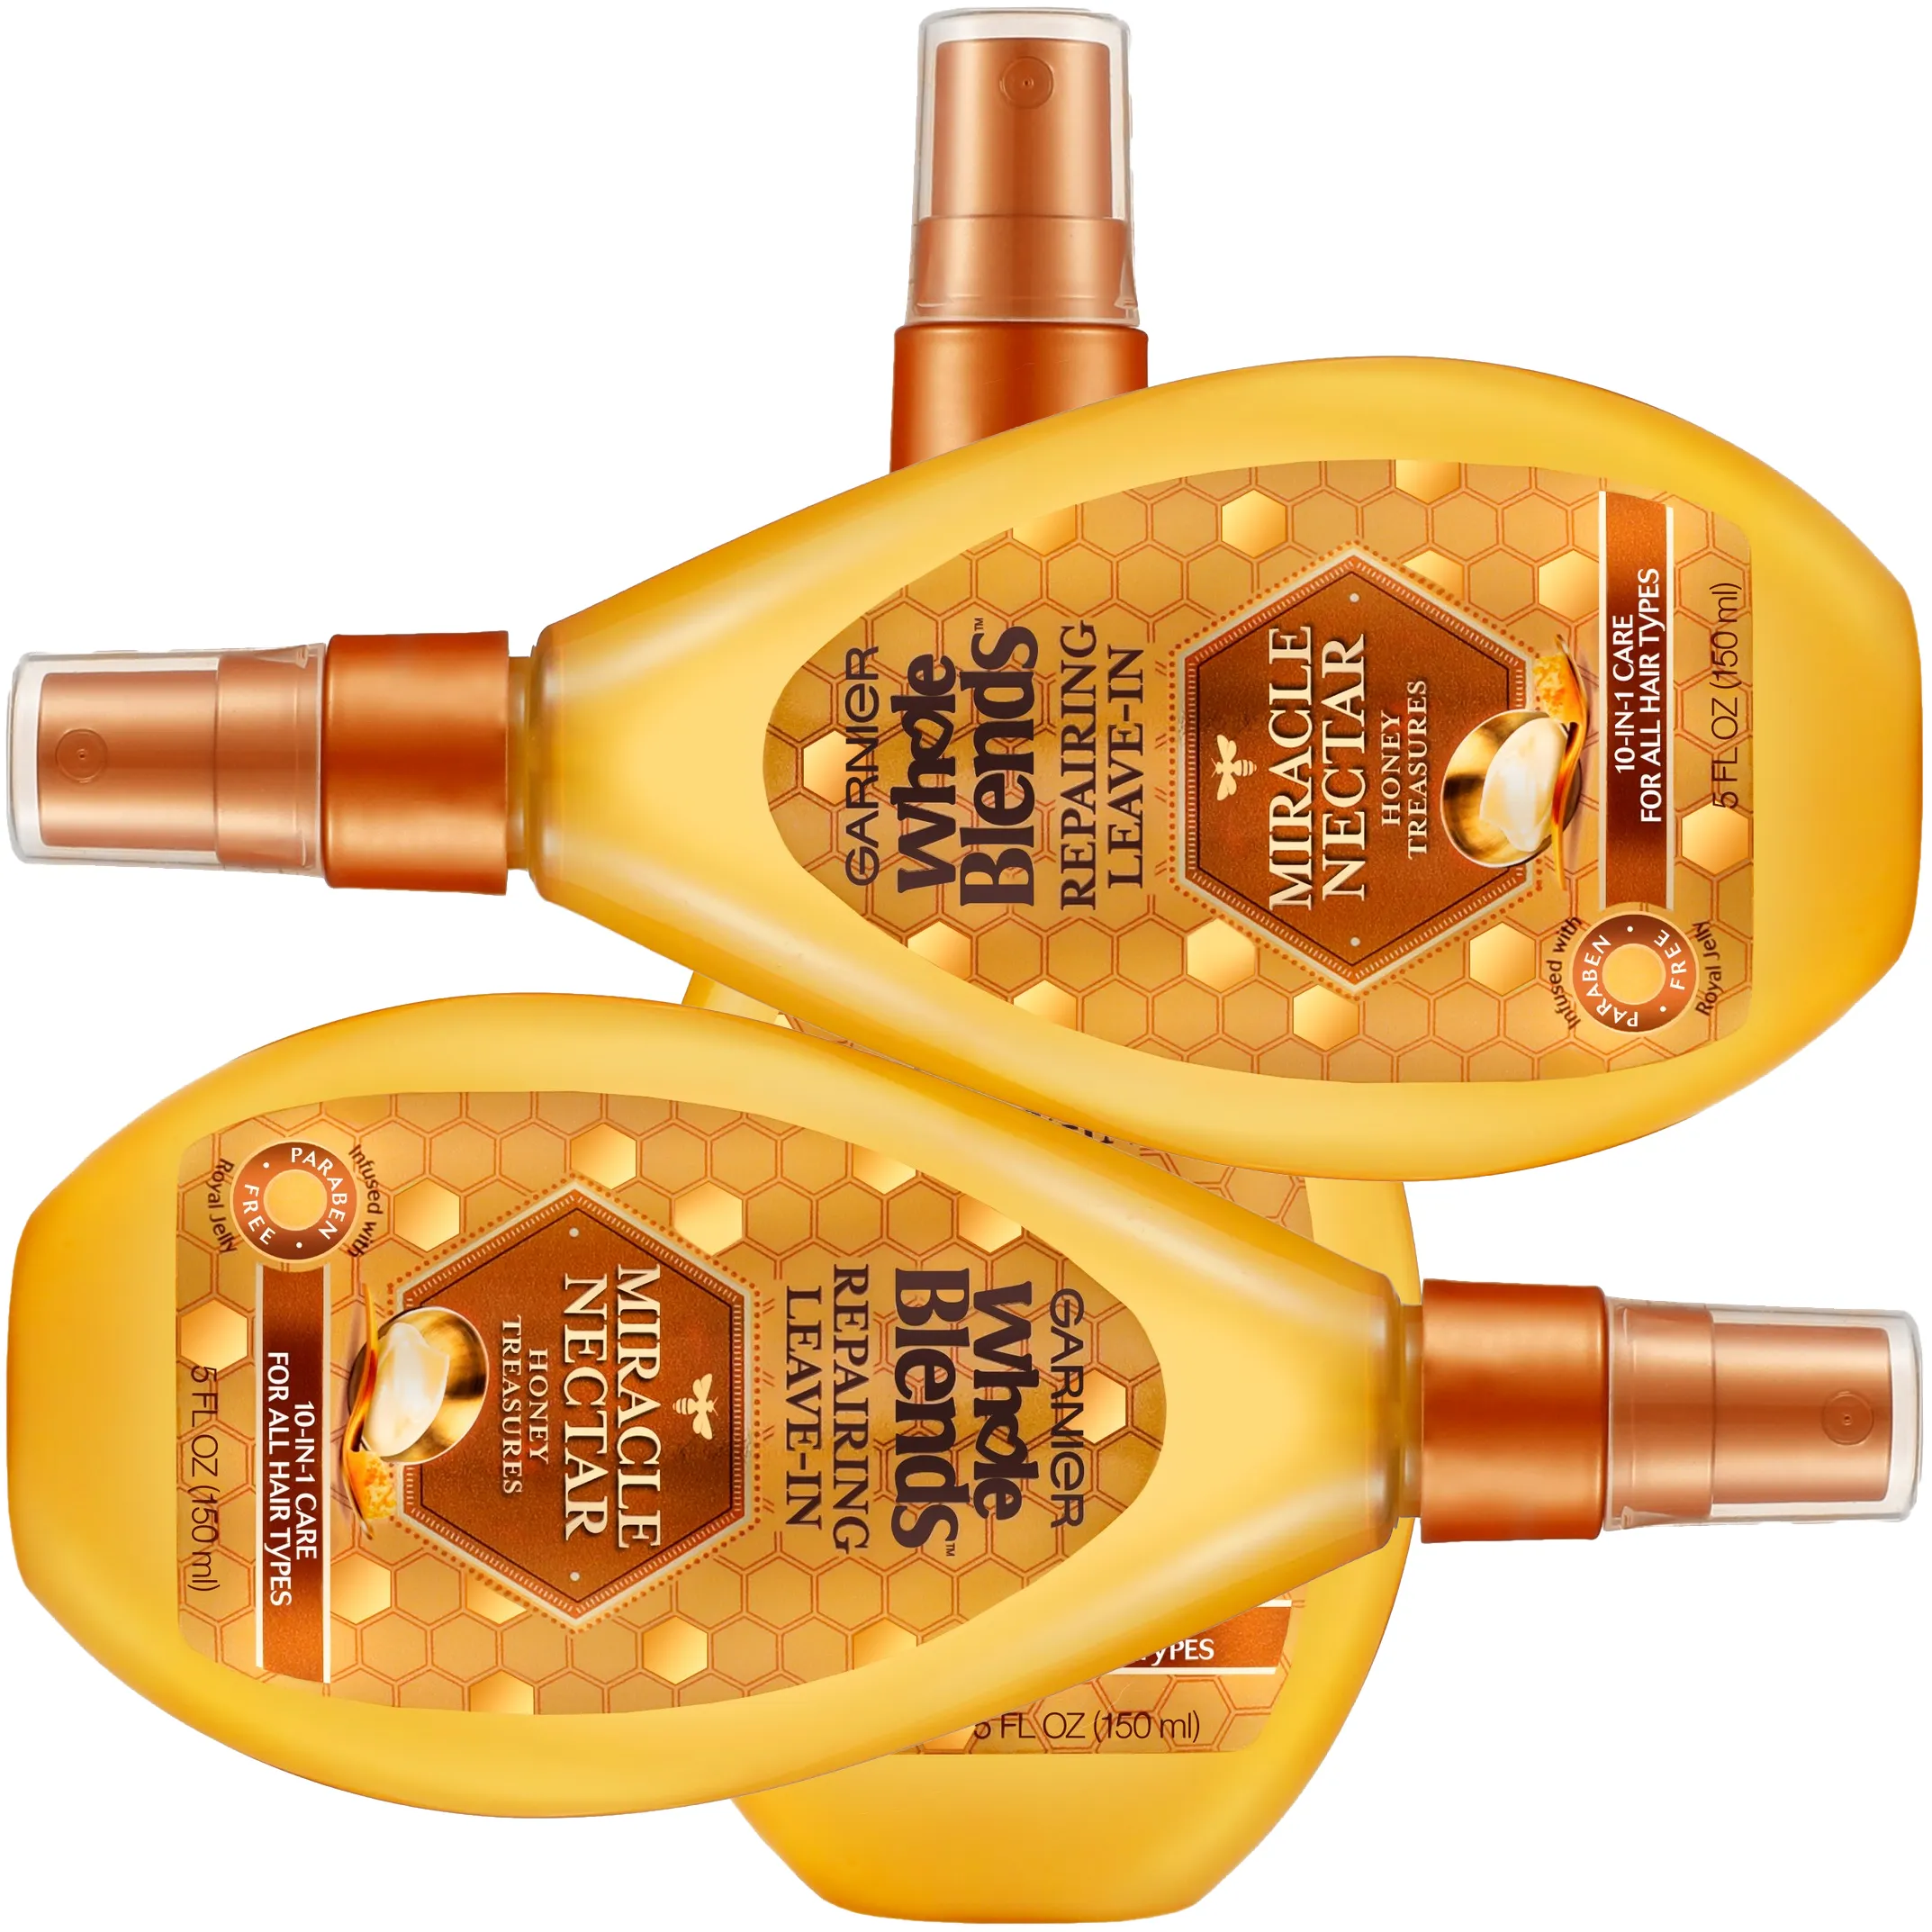 Free Garnier Whole Blends Miracle Nectar Leave-In